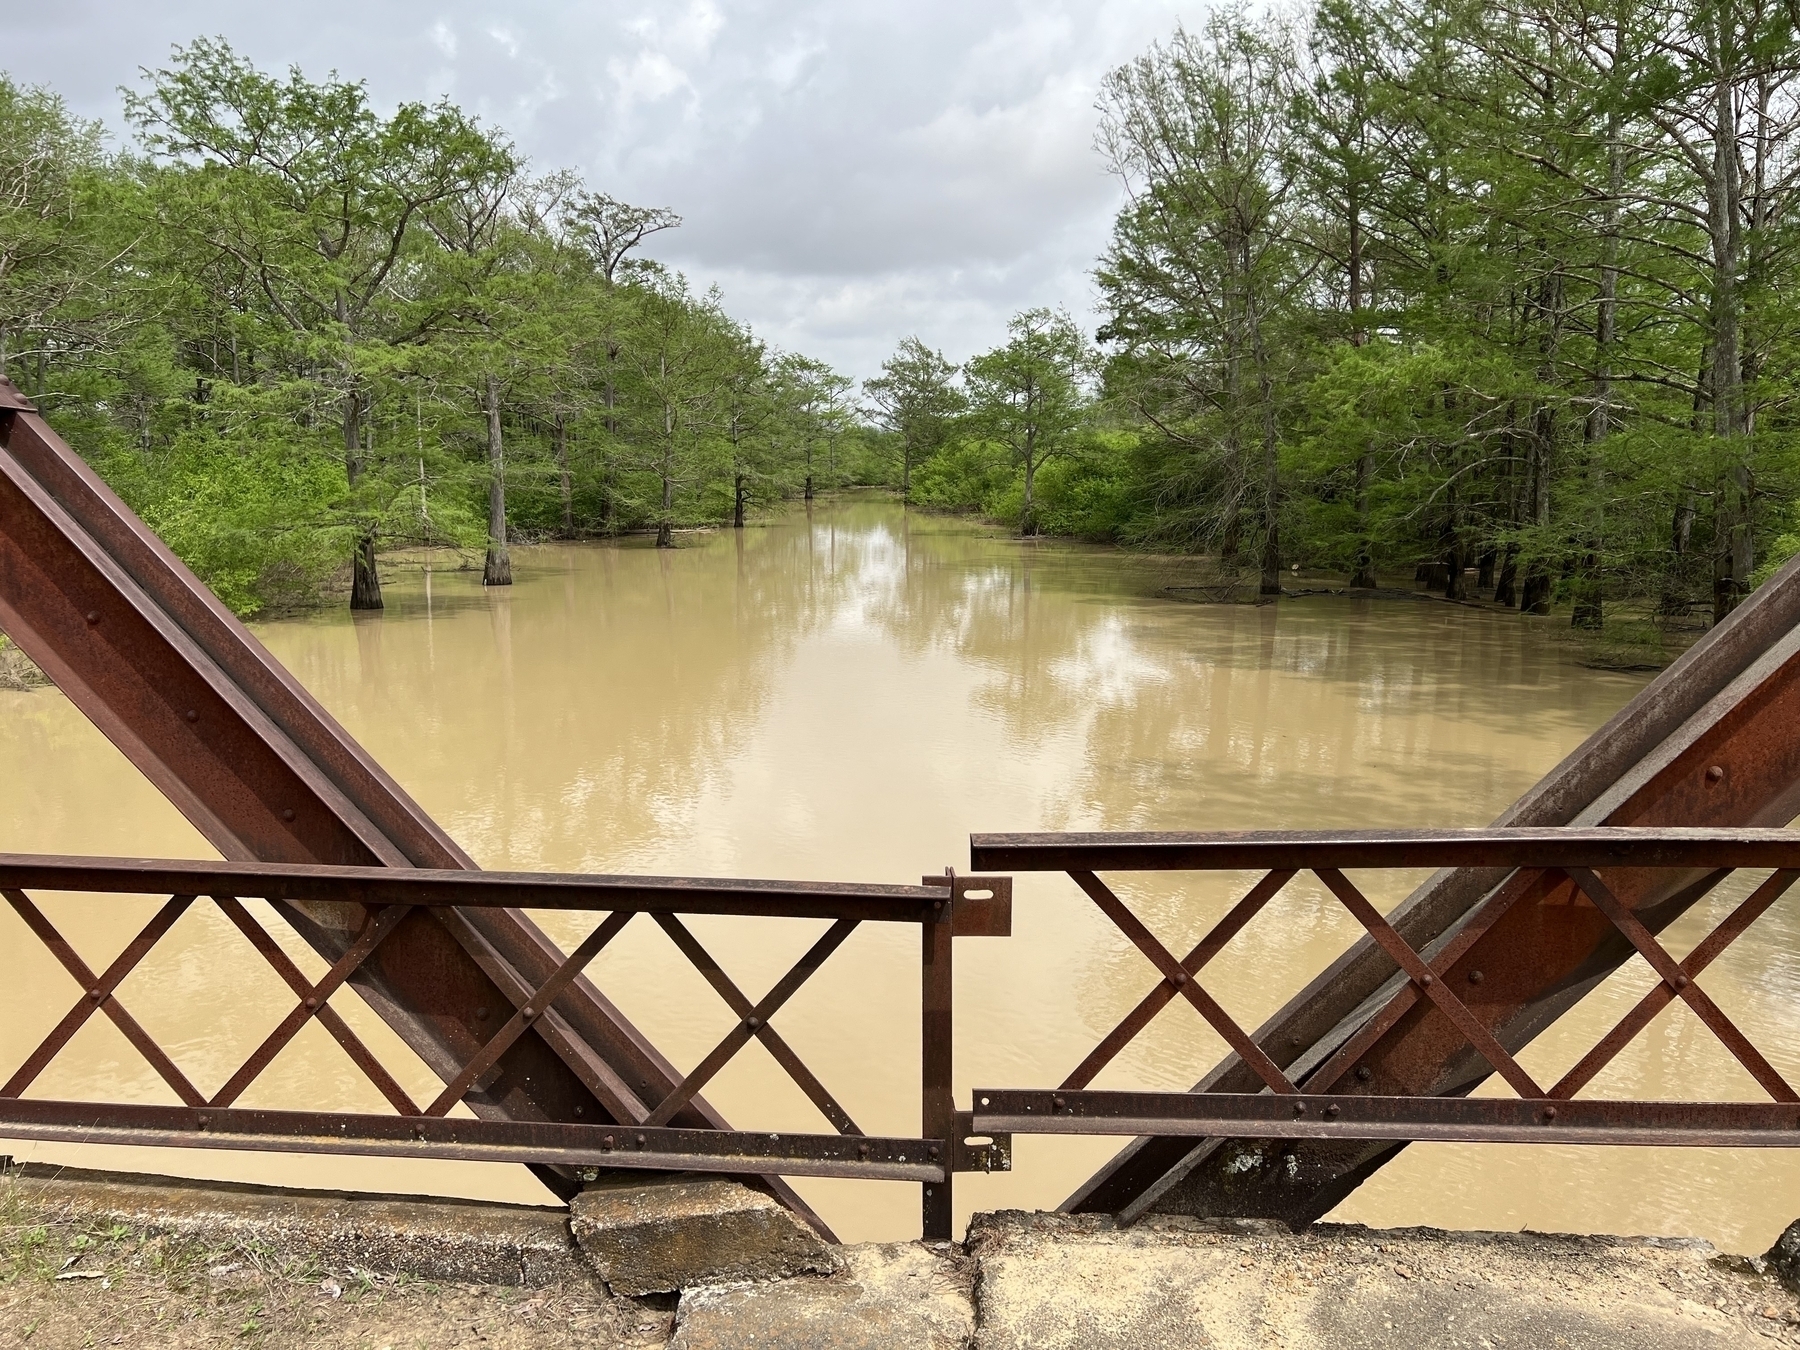 A dilapidated rusted bridge over a flooded bayou, with trees flooded along the banks and muddy water in the channel.